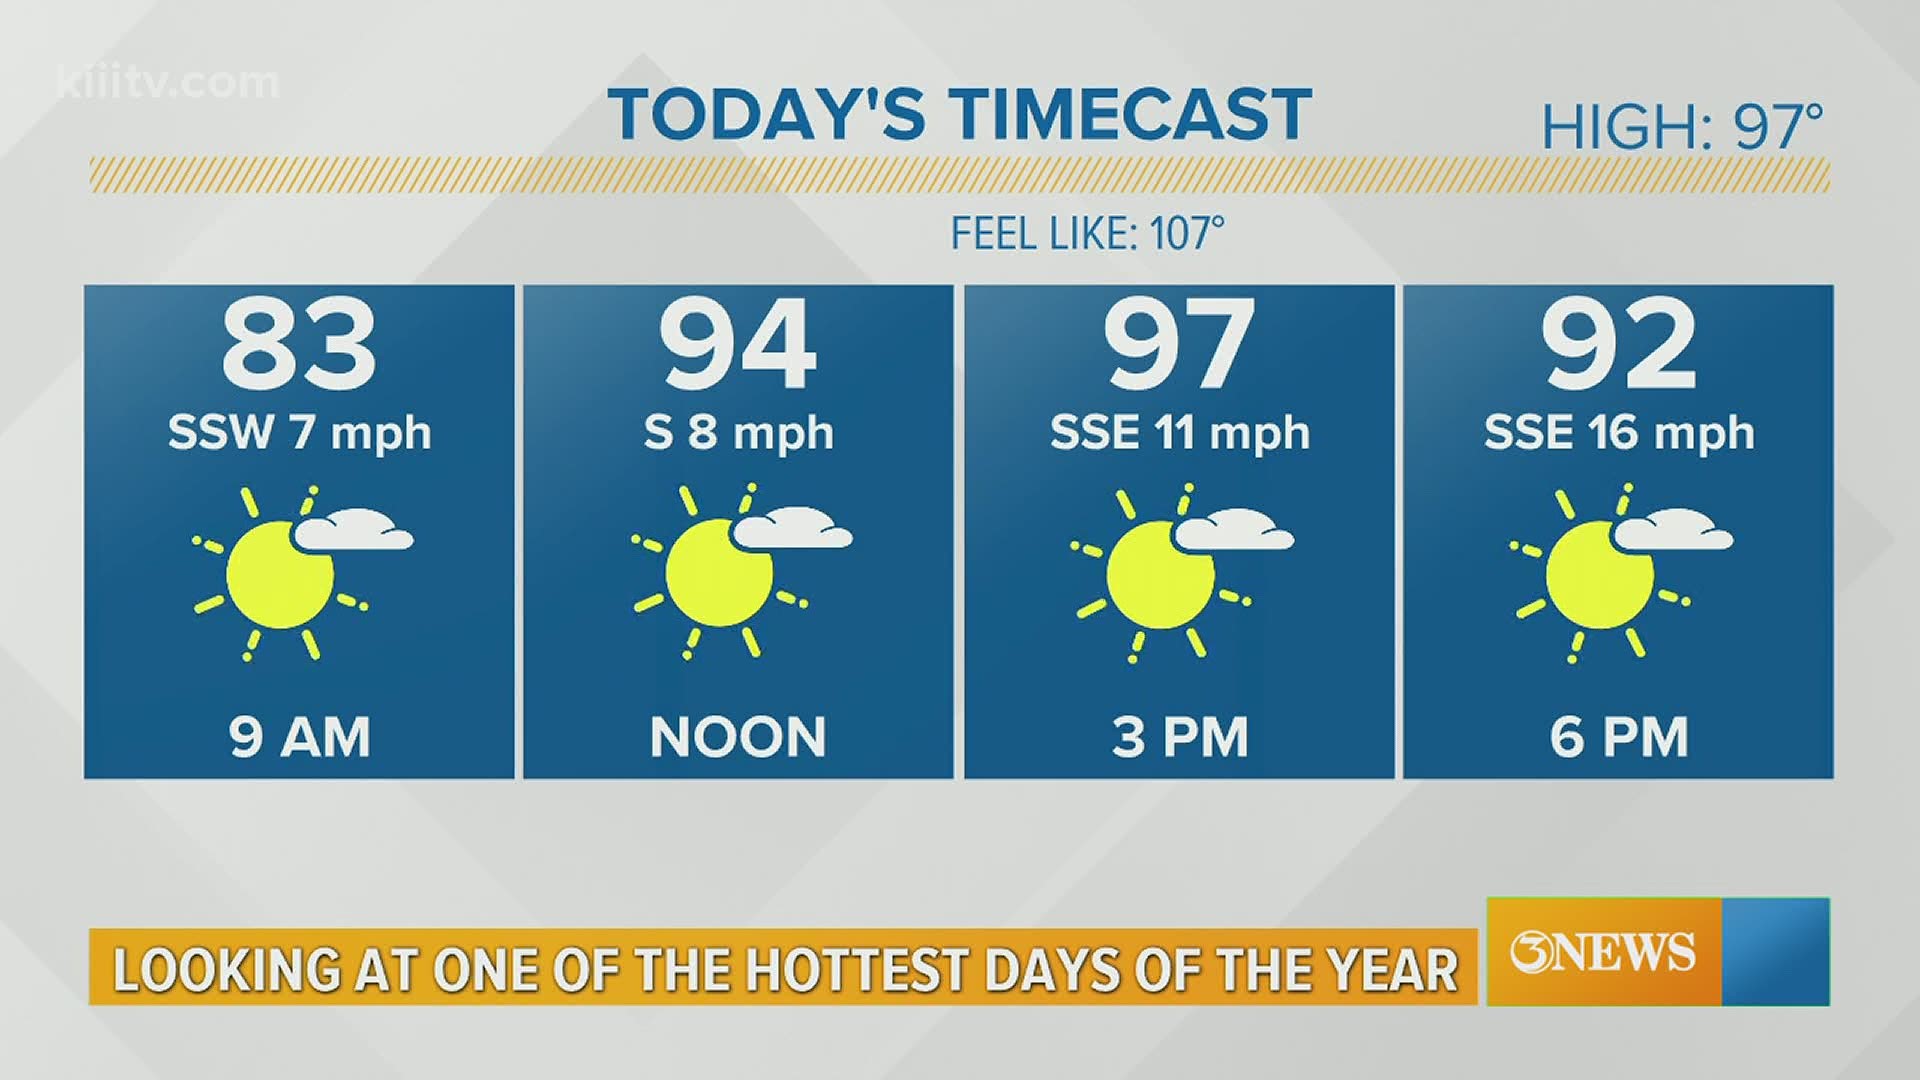 A high temperature of 97 degrees today, but it will feel like 107 degrees. That's dangerous heat!